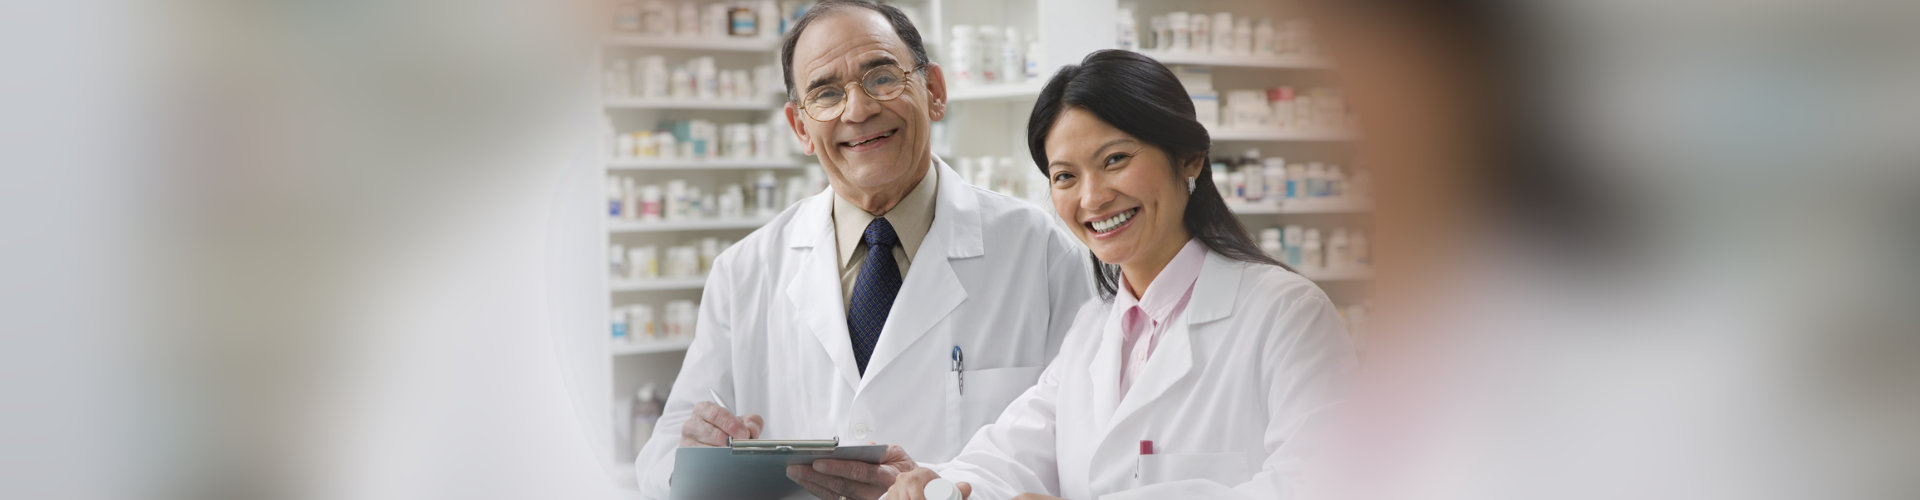 senior pharmacist with his assistant in the drugstore